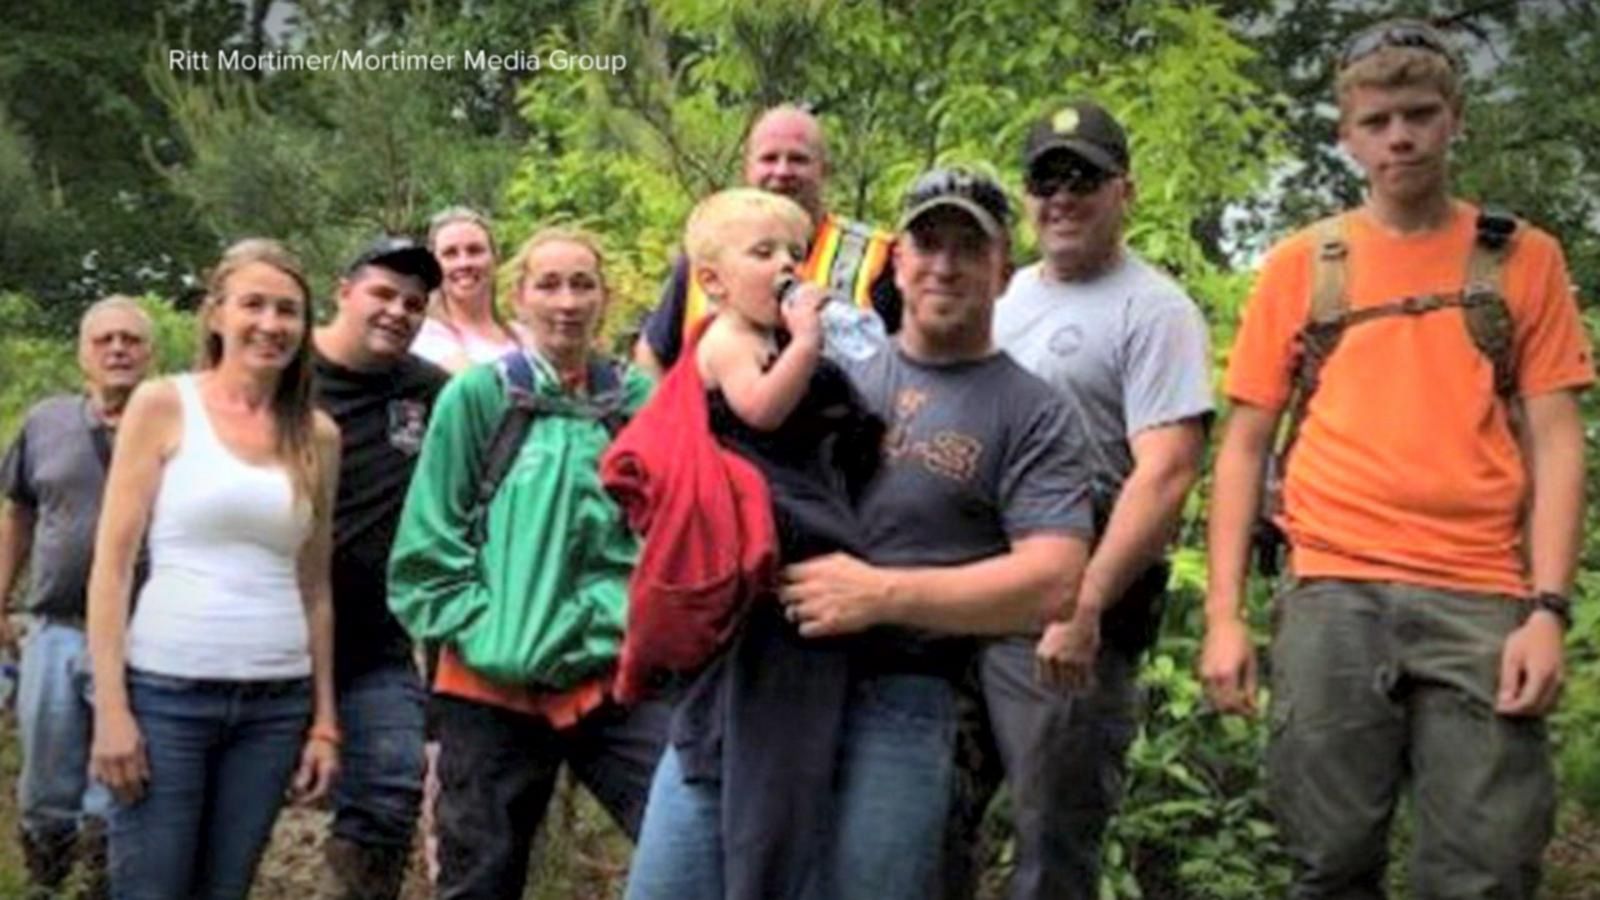 22-month-old found alive after multi-day search - Good Morning America